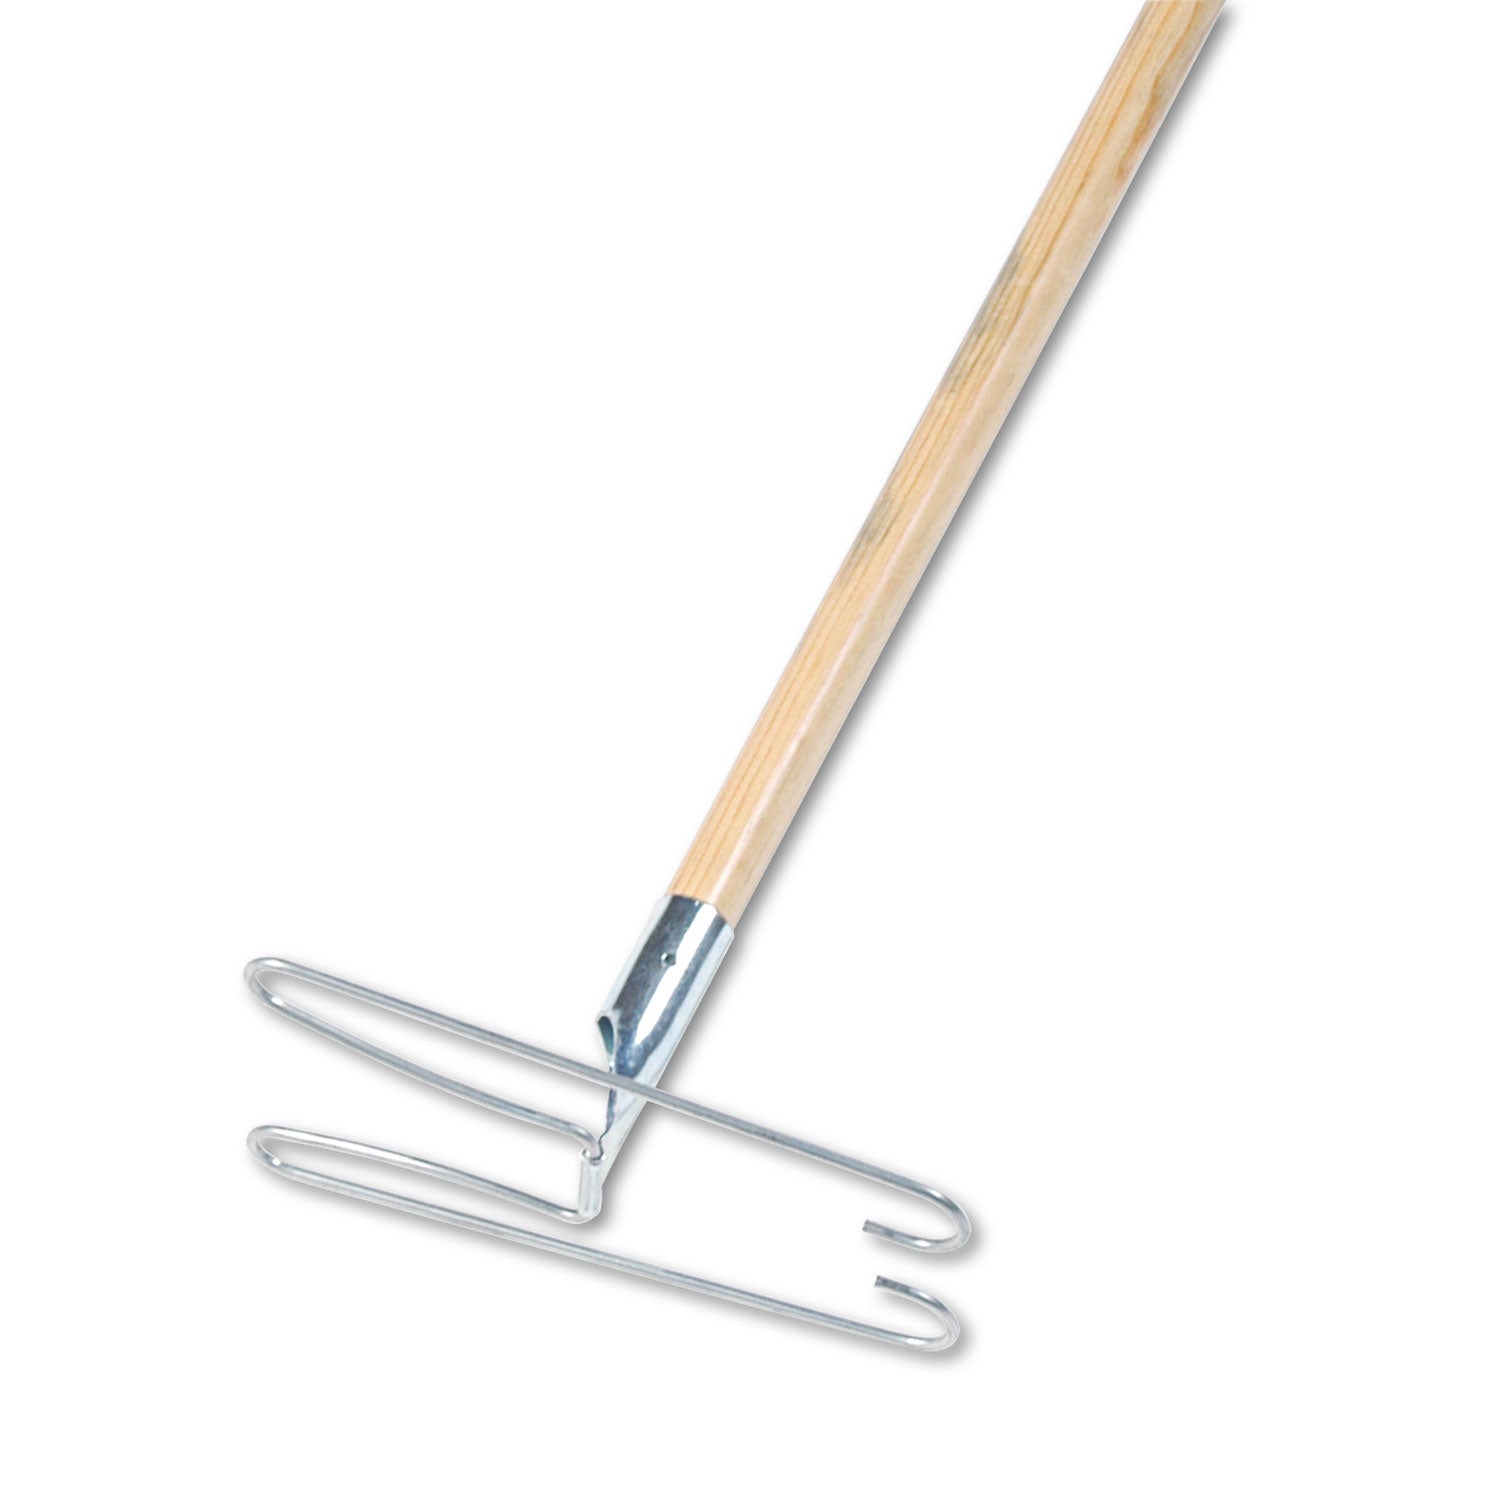 wedge-dust-mop-head-frame-lacquered-wood-handle-094-dia-x-48-length-natural_bwk1492 - 2